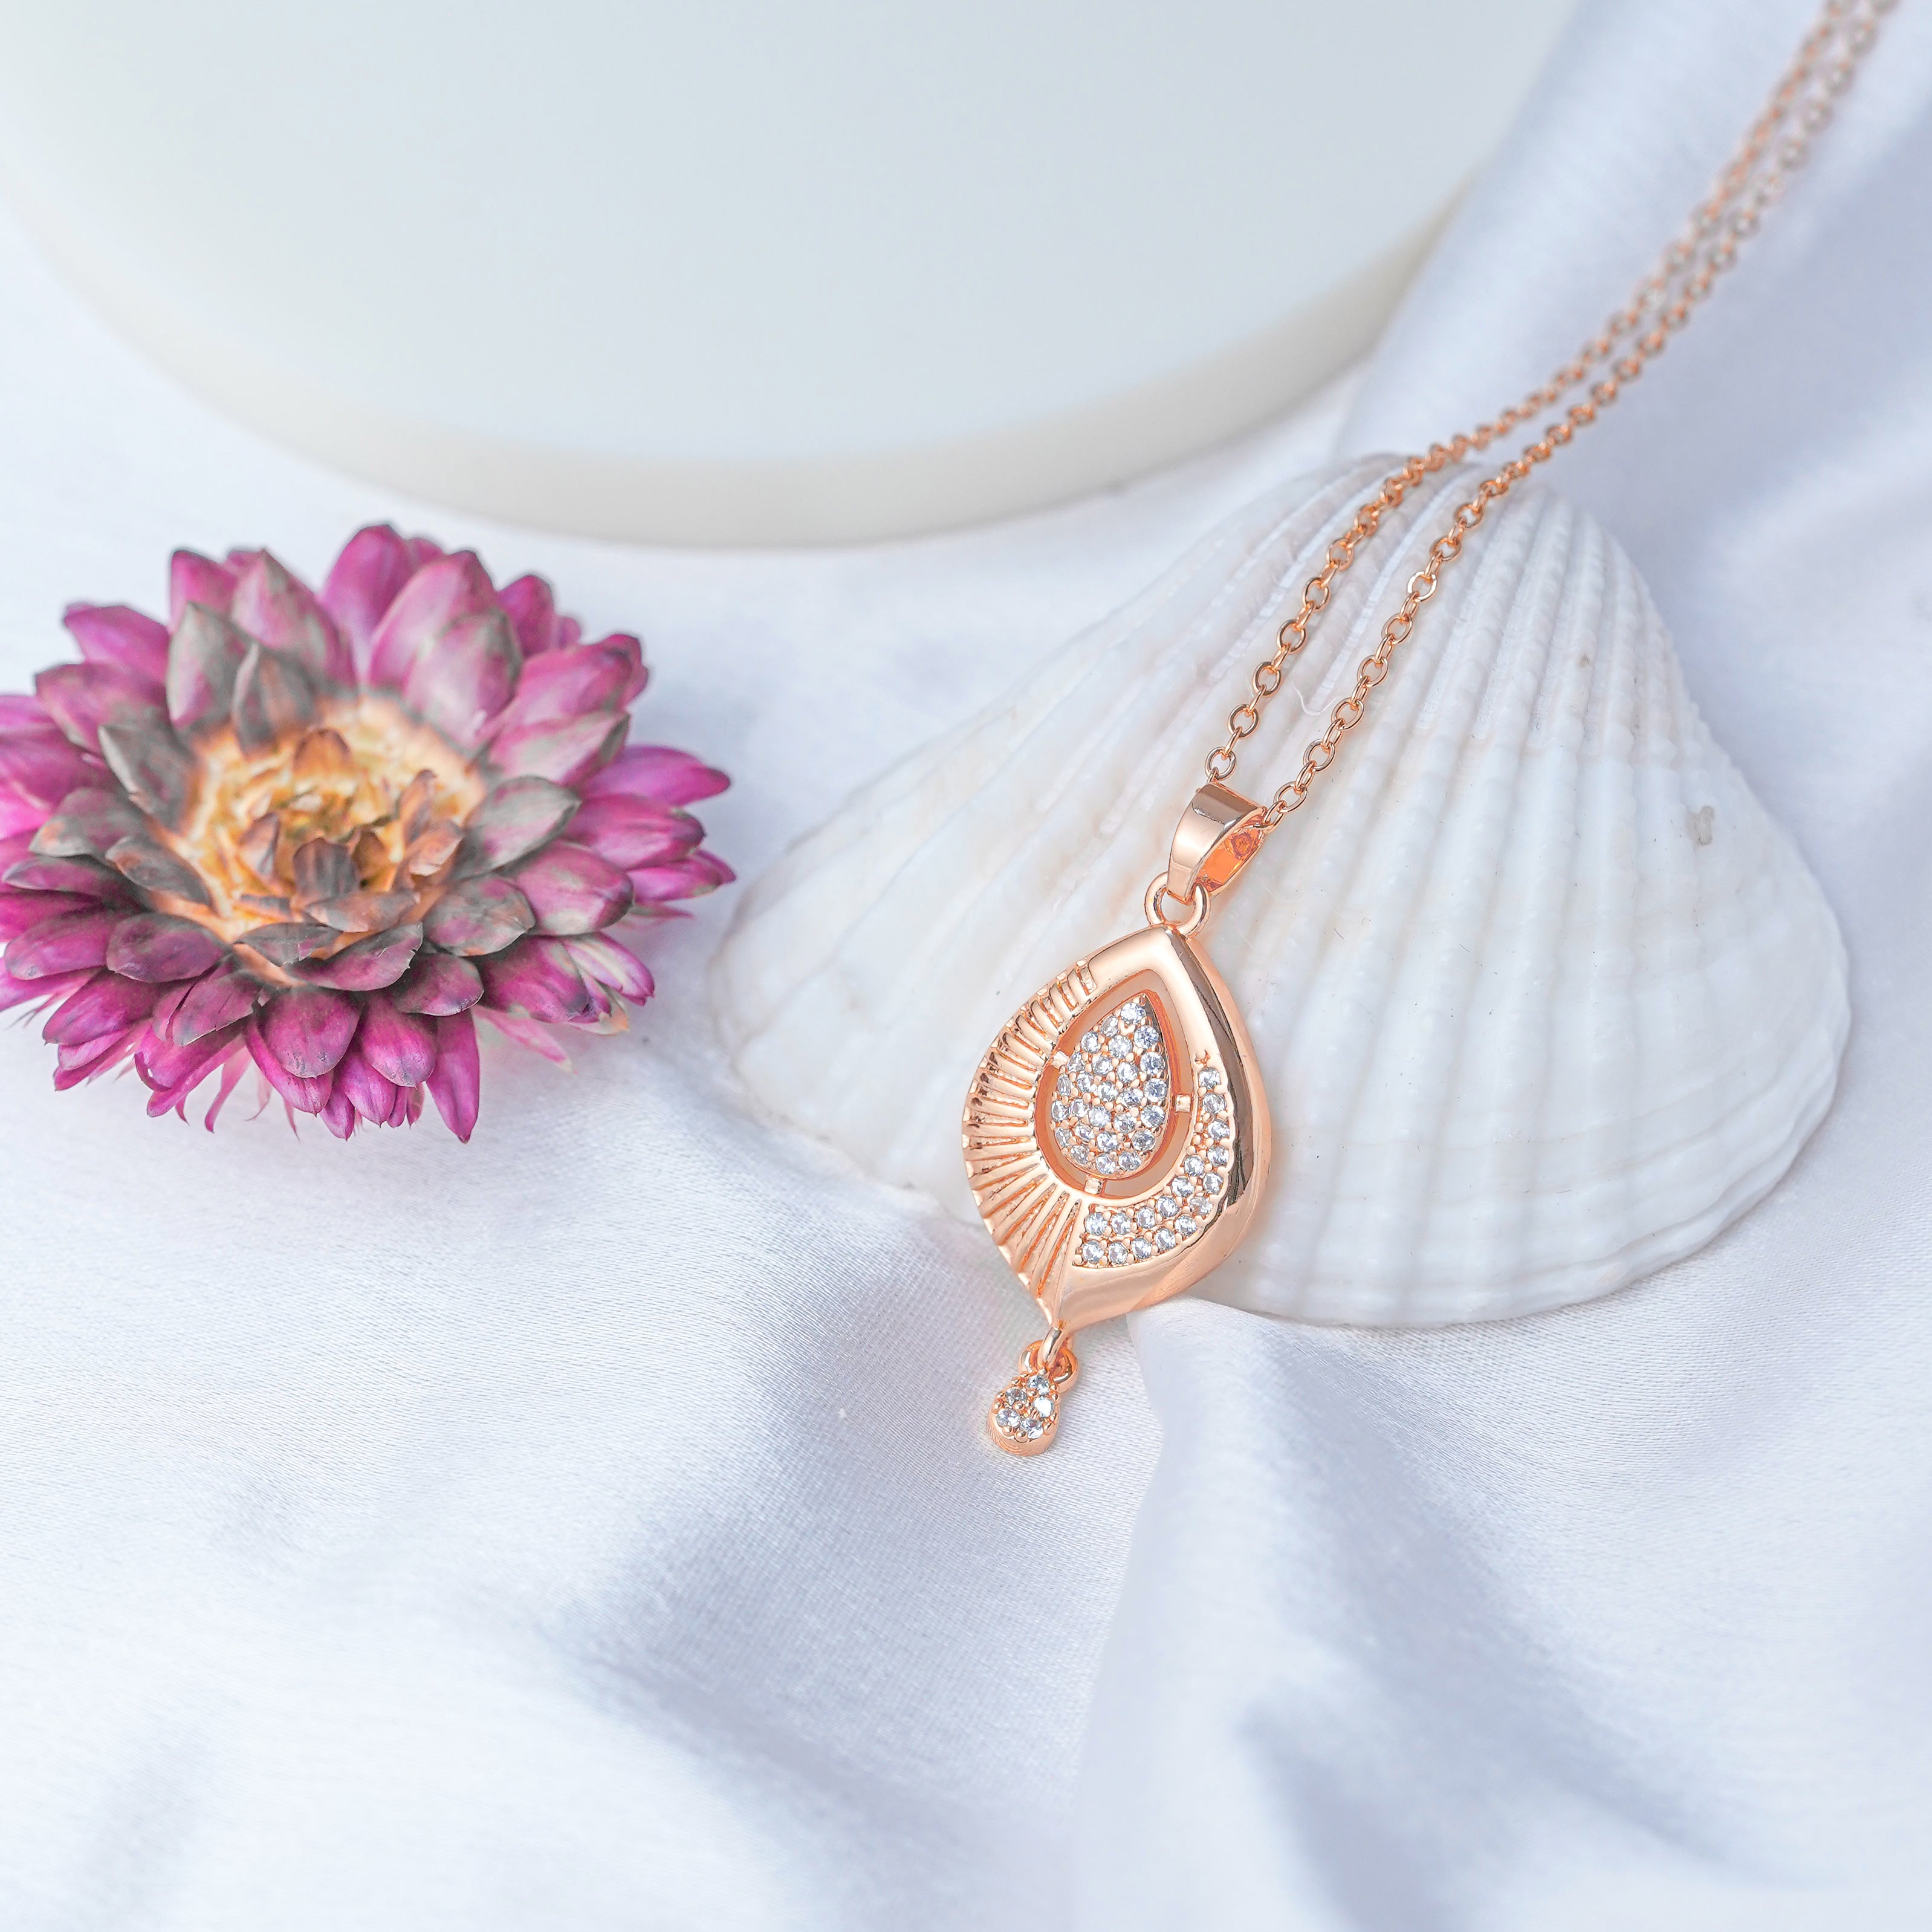 Redefined
Zarder Rose Gold Designer Chain Pendant Set: Effortless Luxury for Every Occasion